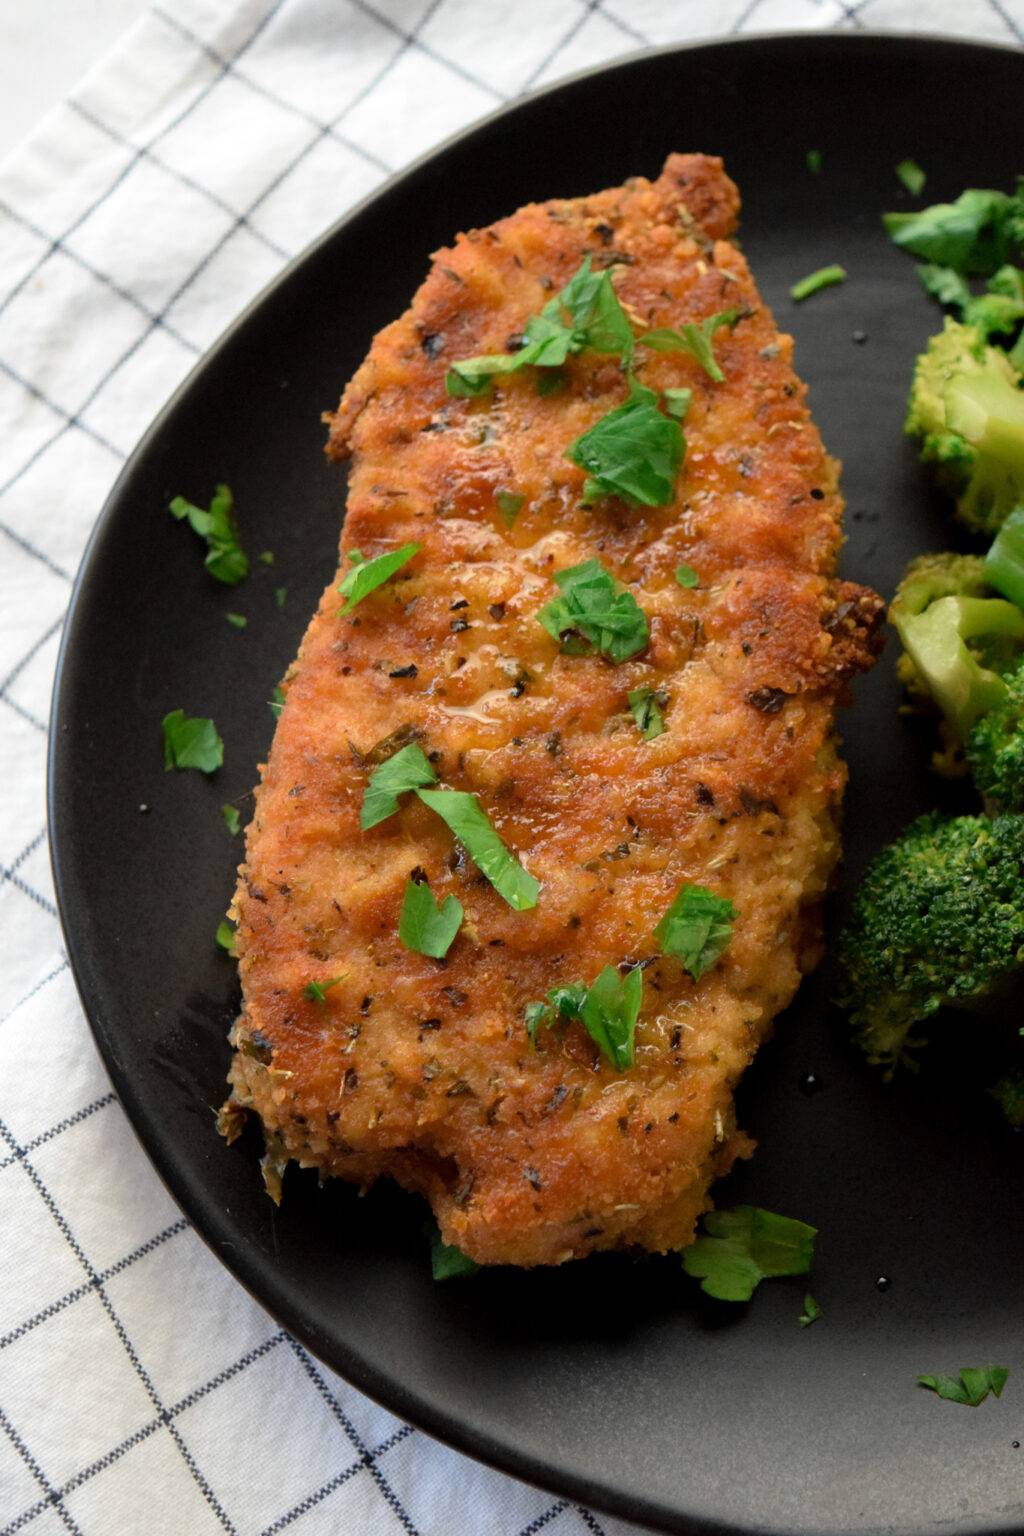 breaded gluten free pork chops on a black plate with broccoli